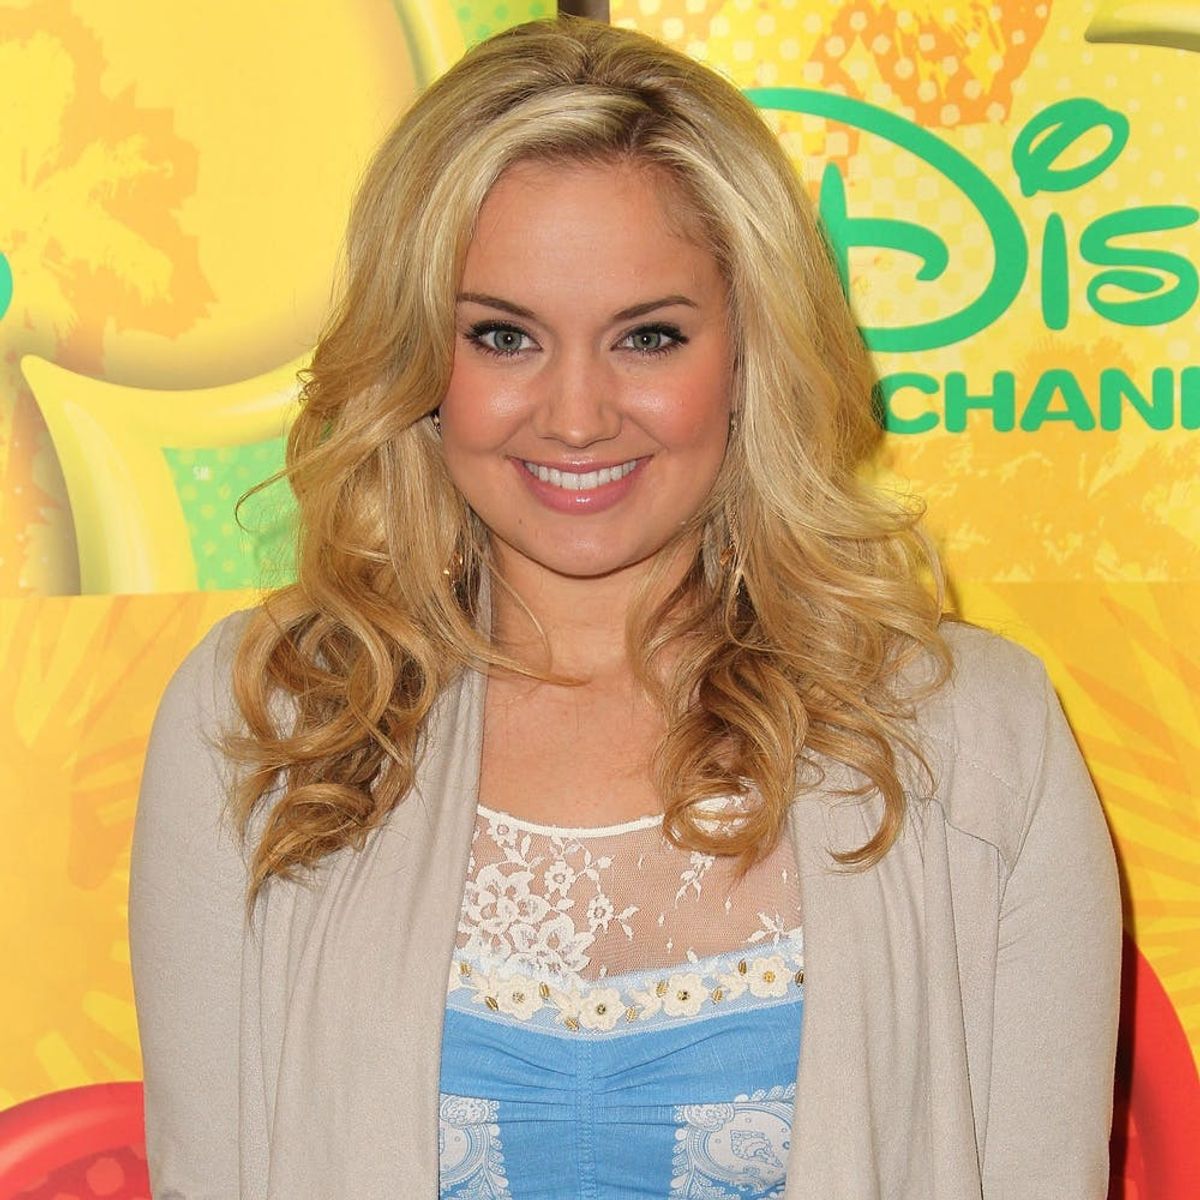 Disney Star Tiffany Thornton Remarries Two Years After Her Husband’s Tragic Death